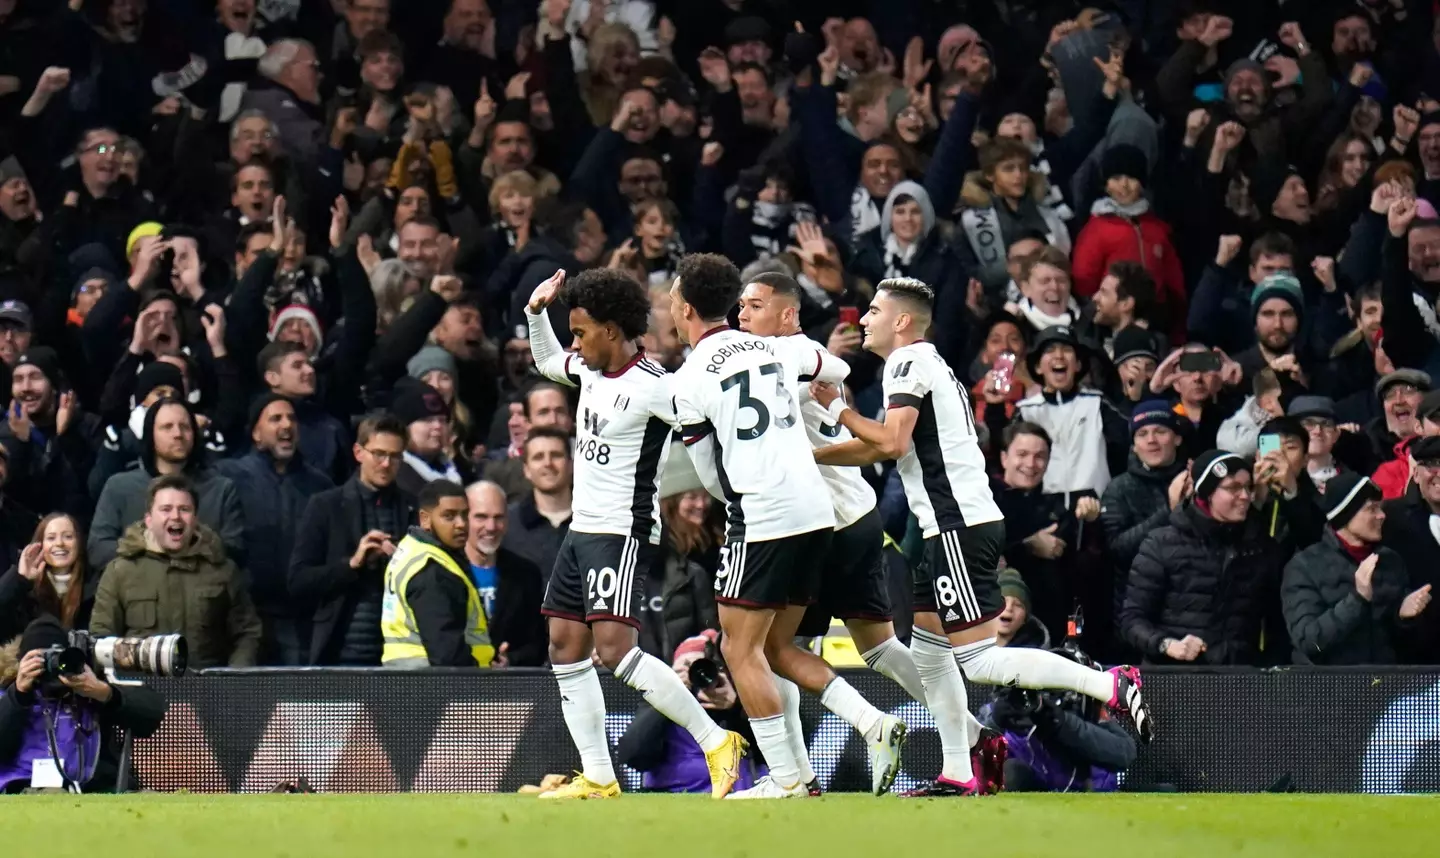 Willian was mobbed by his teammates but refused to celebrate. Image: Alamy